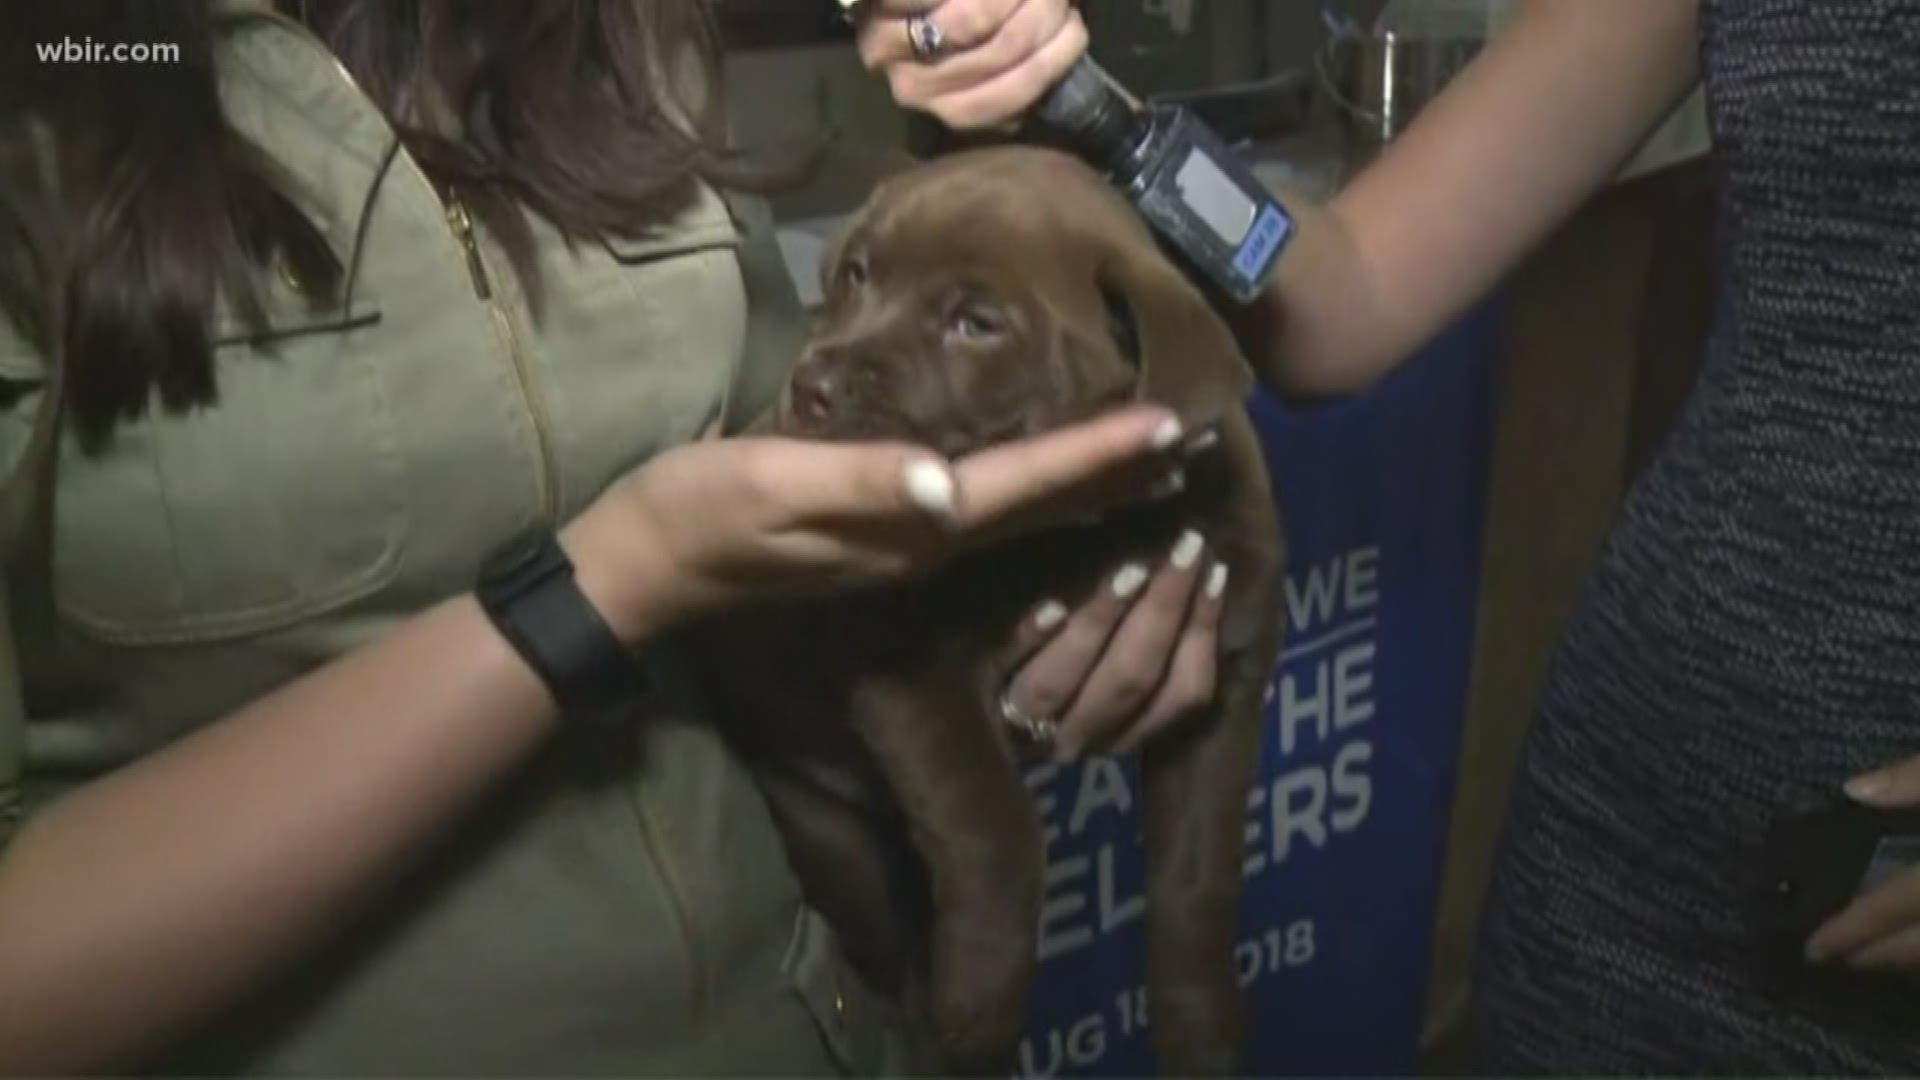 WBIR is joining in a nationwide effort to "Clear the Shelters" this weekend. Reporter Katie Inman introduces us to a puppy in need of a home at Young-Williams Animal Center.